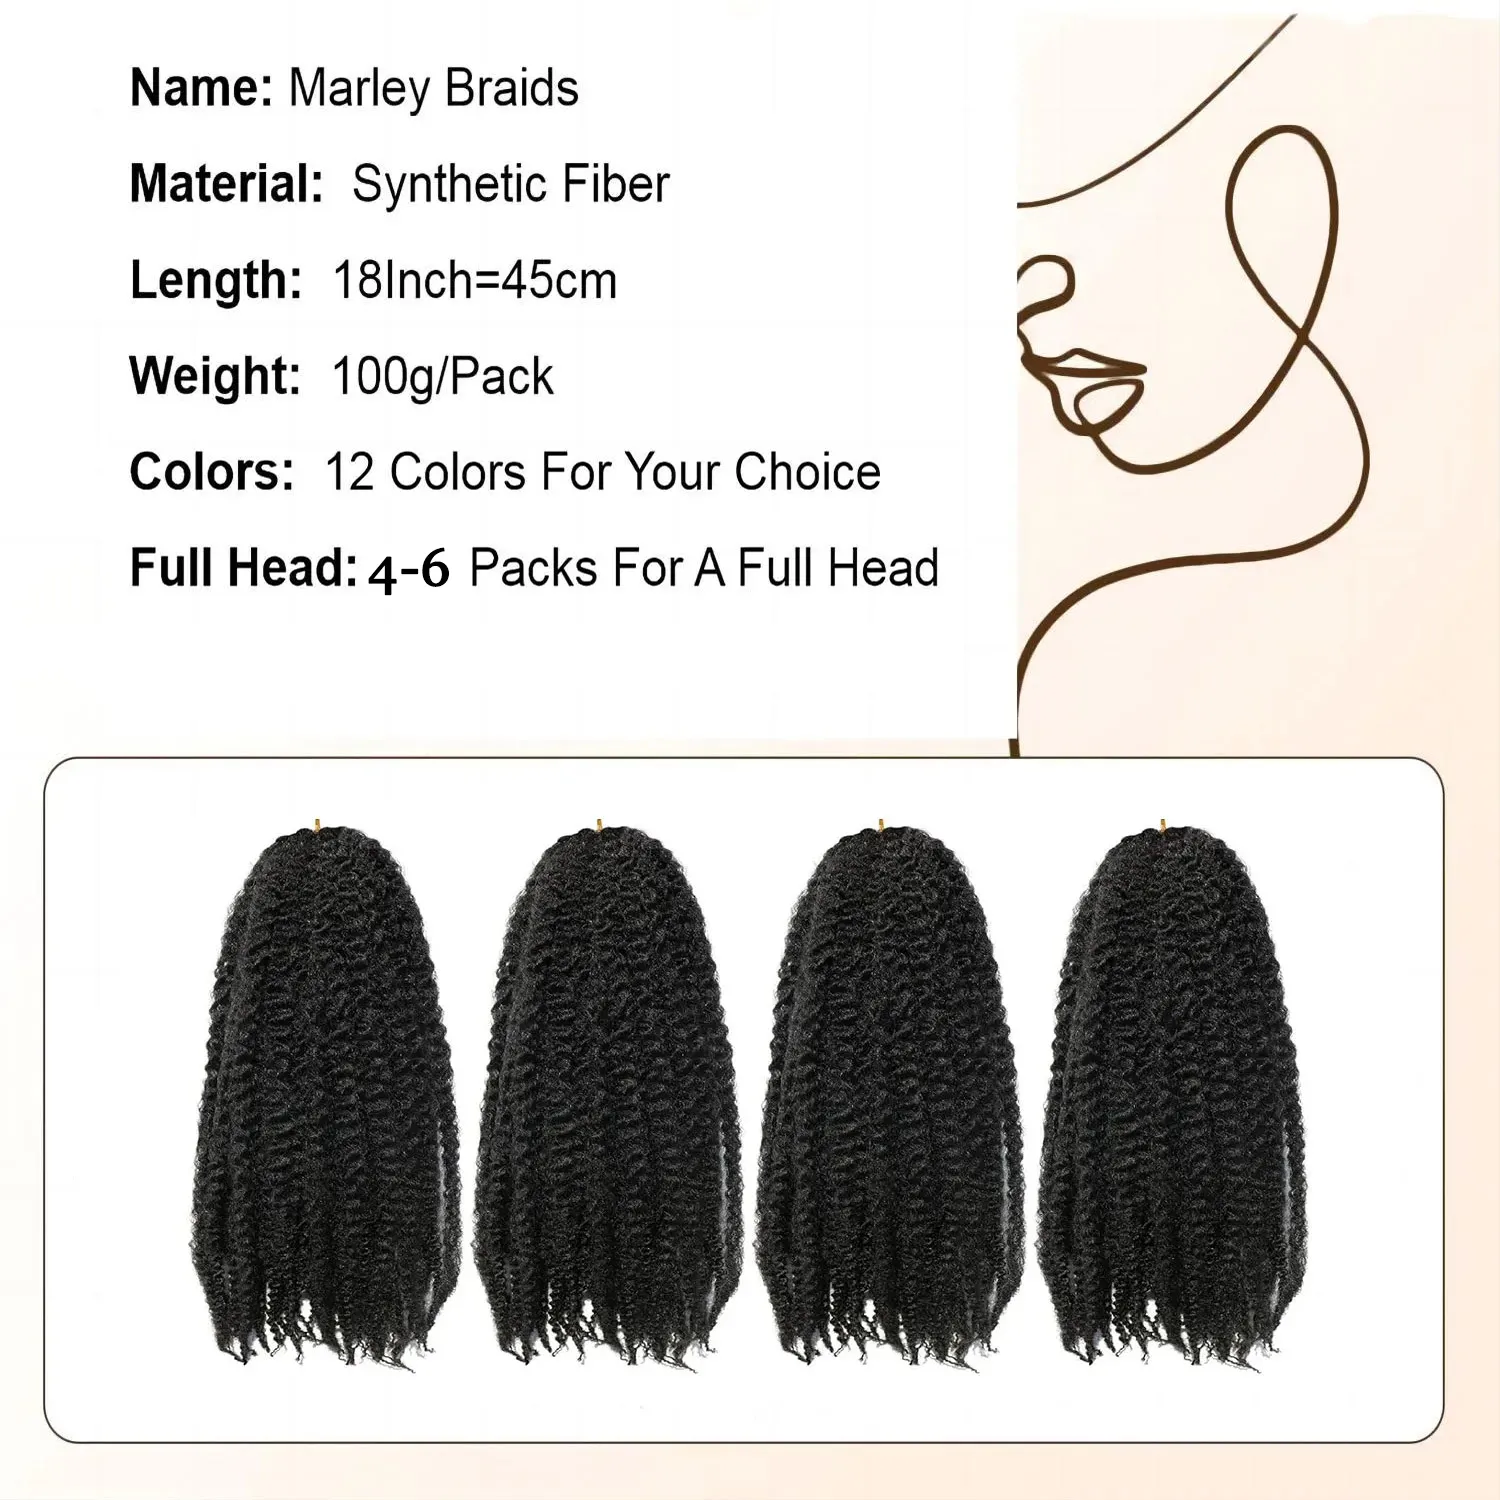 

Marley Afro Kinky Braiding Hair 18inch Synthetic Crochet Marly Twist Braids Hair Extensions For Women 100g 20 Strands/Pack